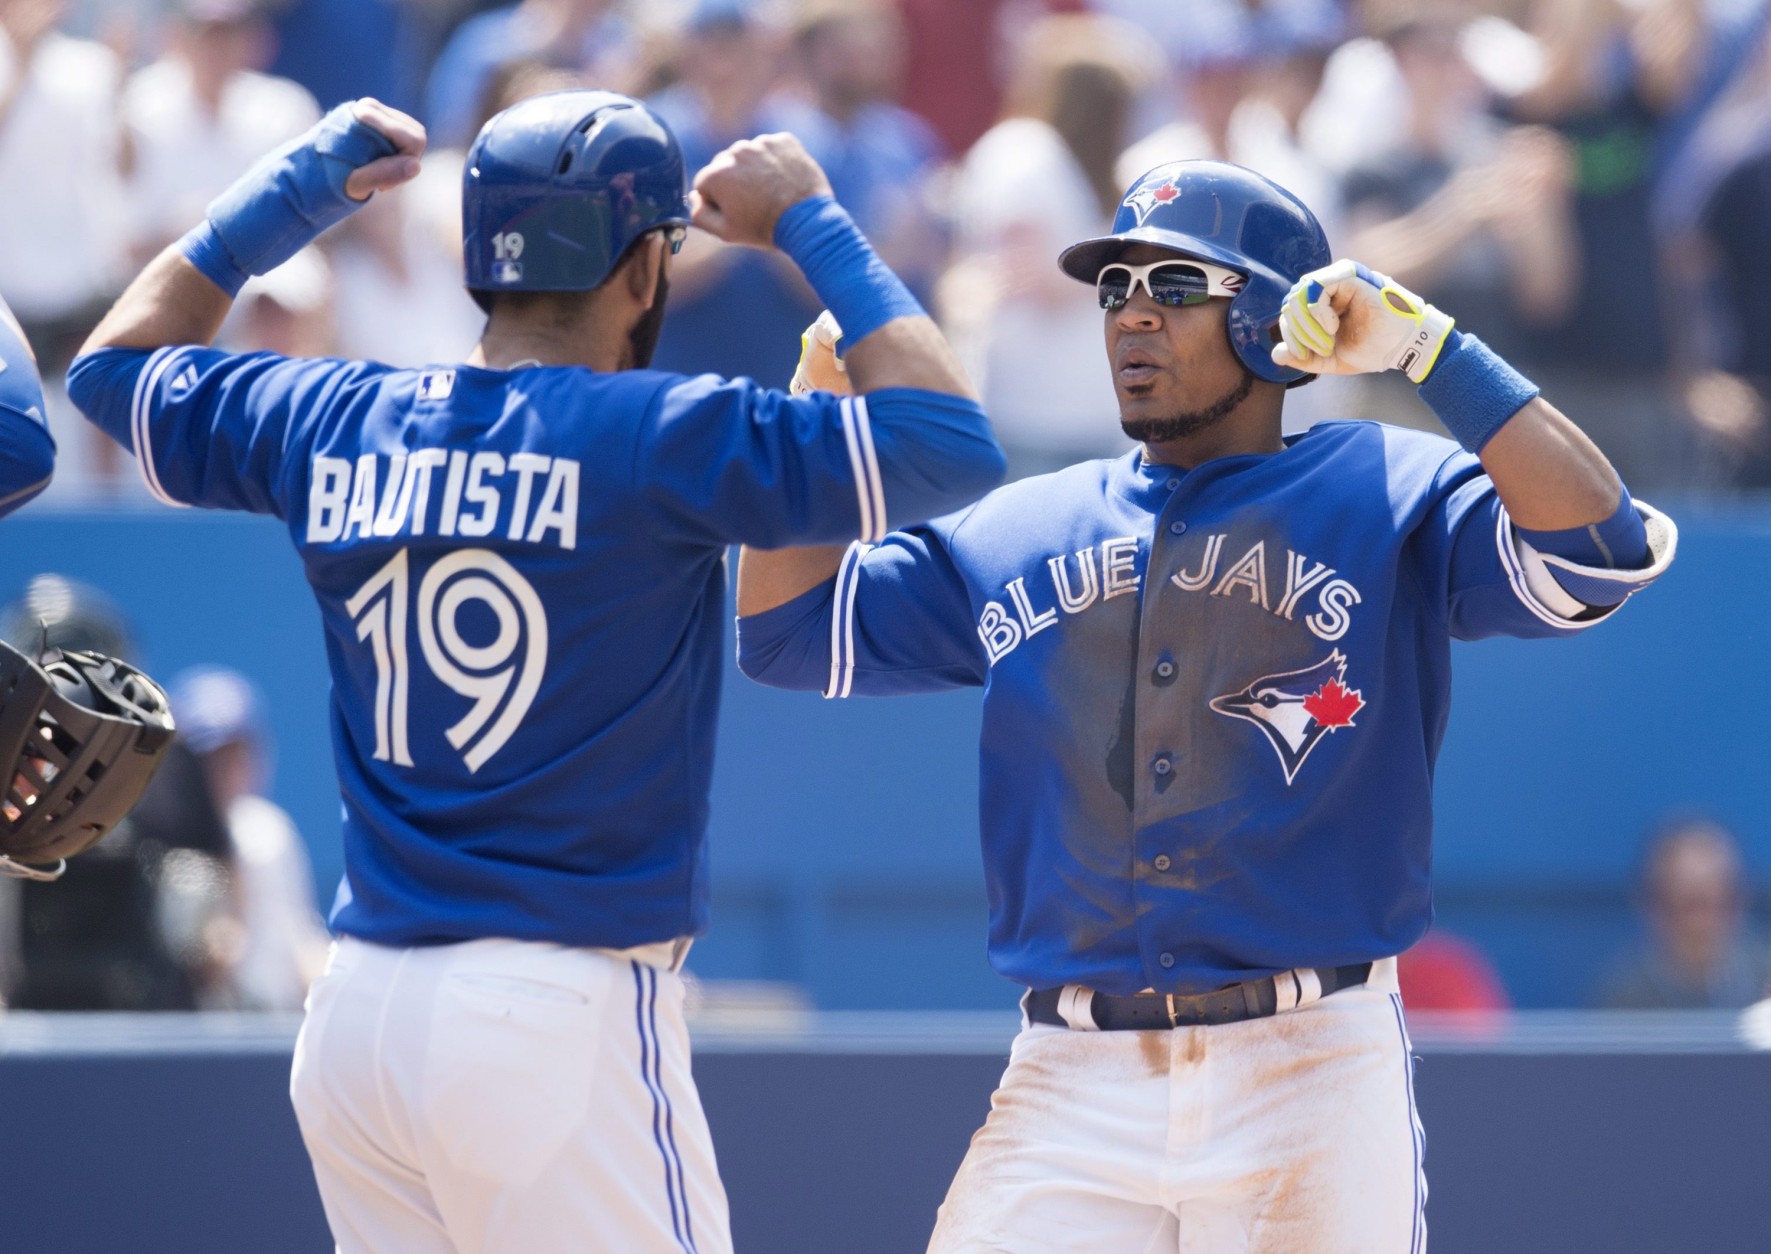 Blue Jays to Discuss Extensions With Jose Bautista and Edwin Encarnacion